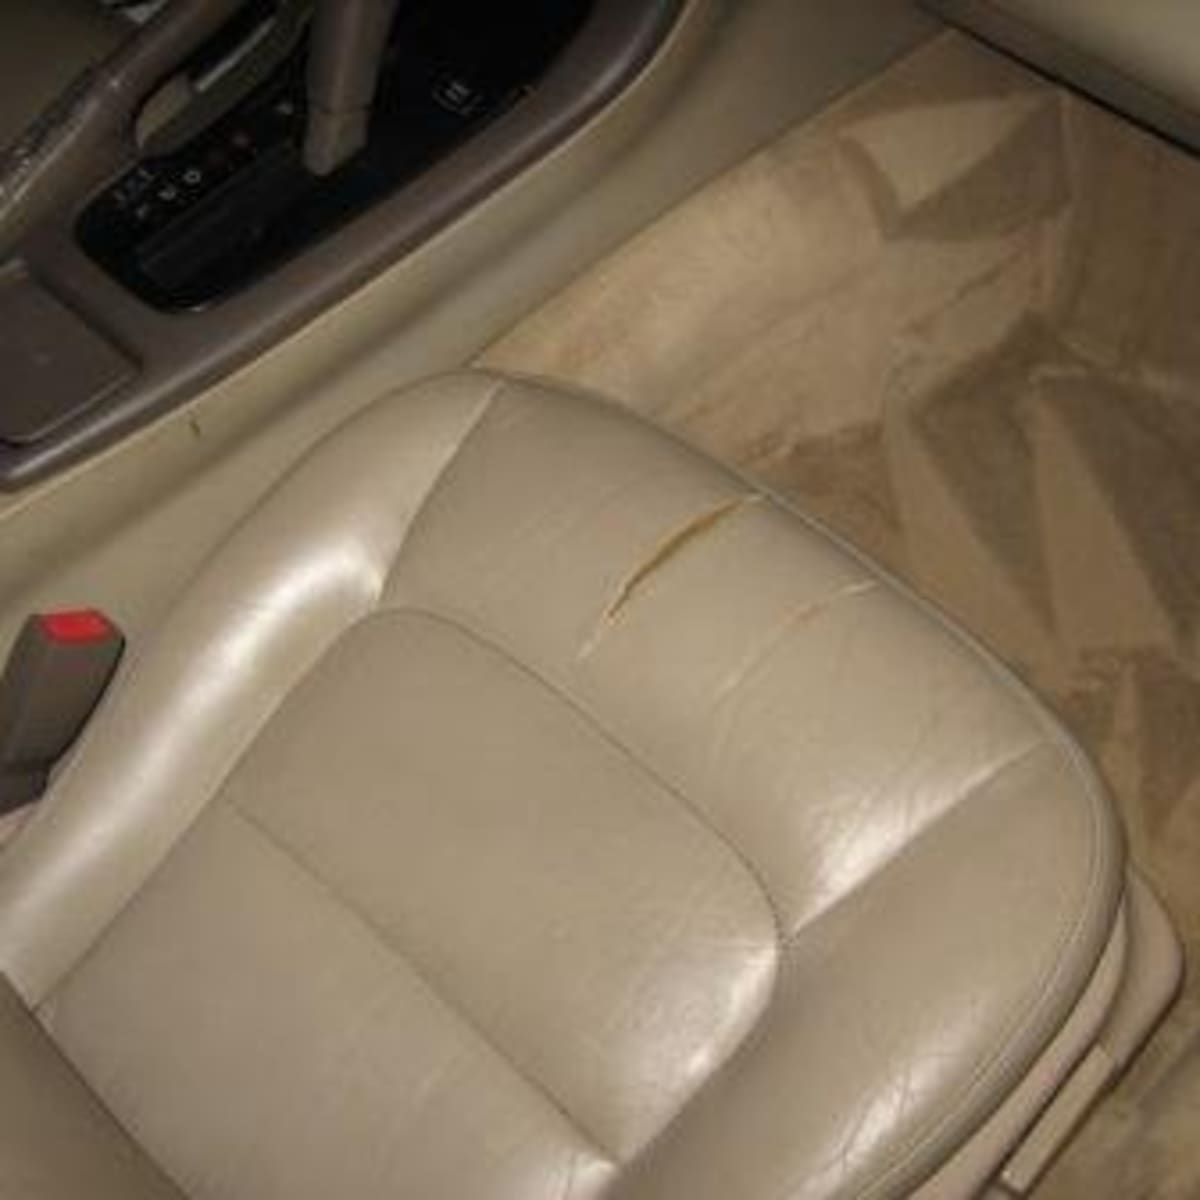 How To Repair Leather And Vinyl Car Seats Yourself Axleaddict - How To Repair Vinyl Car Seat Tear